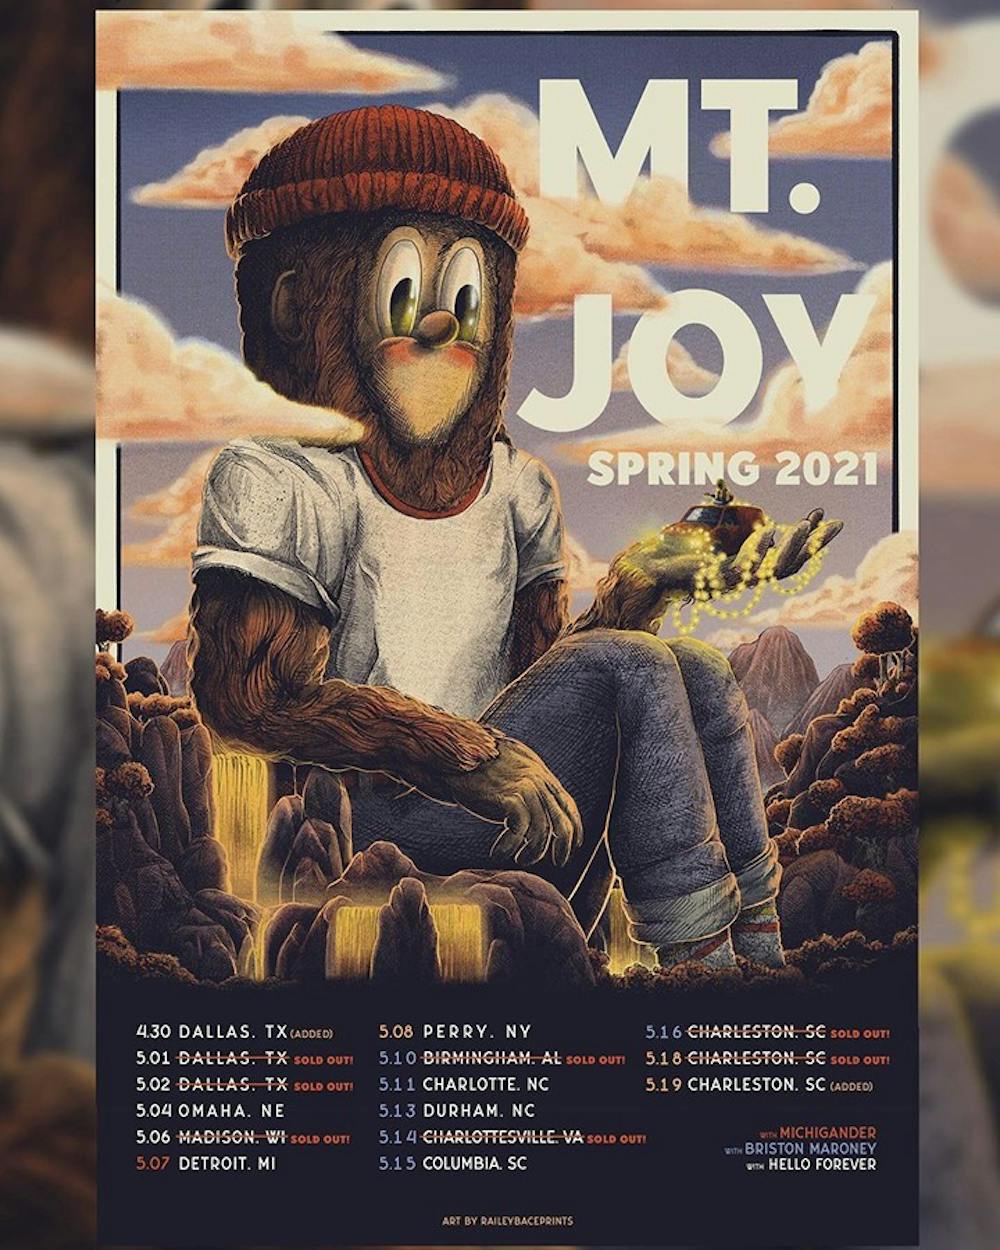 A poster for Mt. Joy's first tour since the pandemic started. The group will travel to 12 different locations in May to perform.